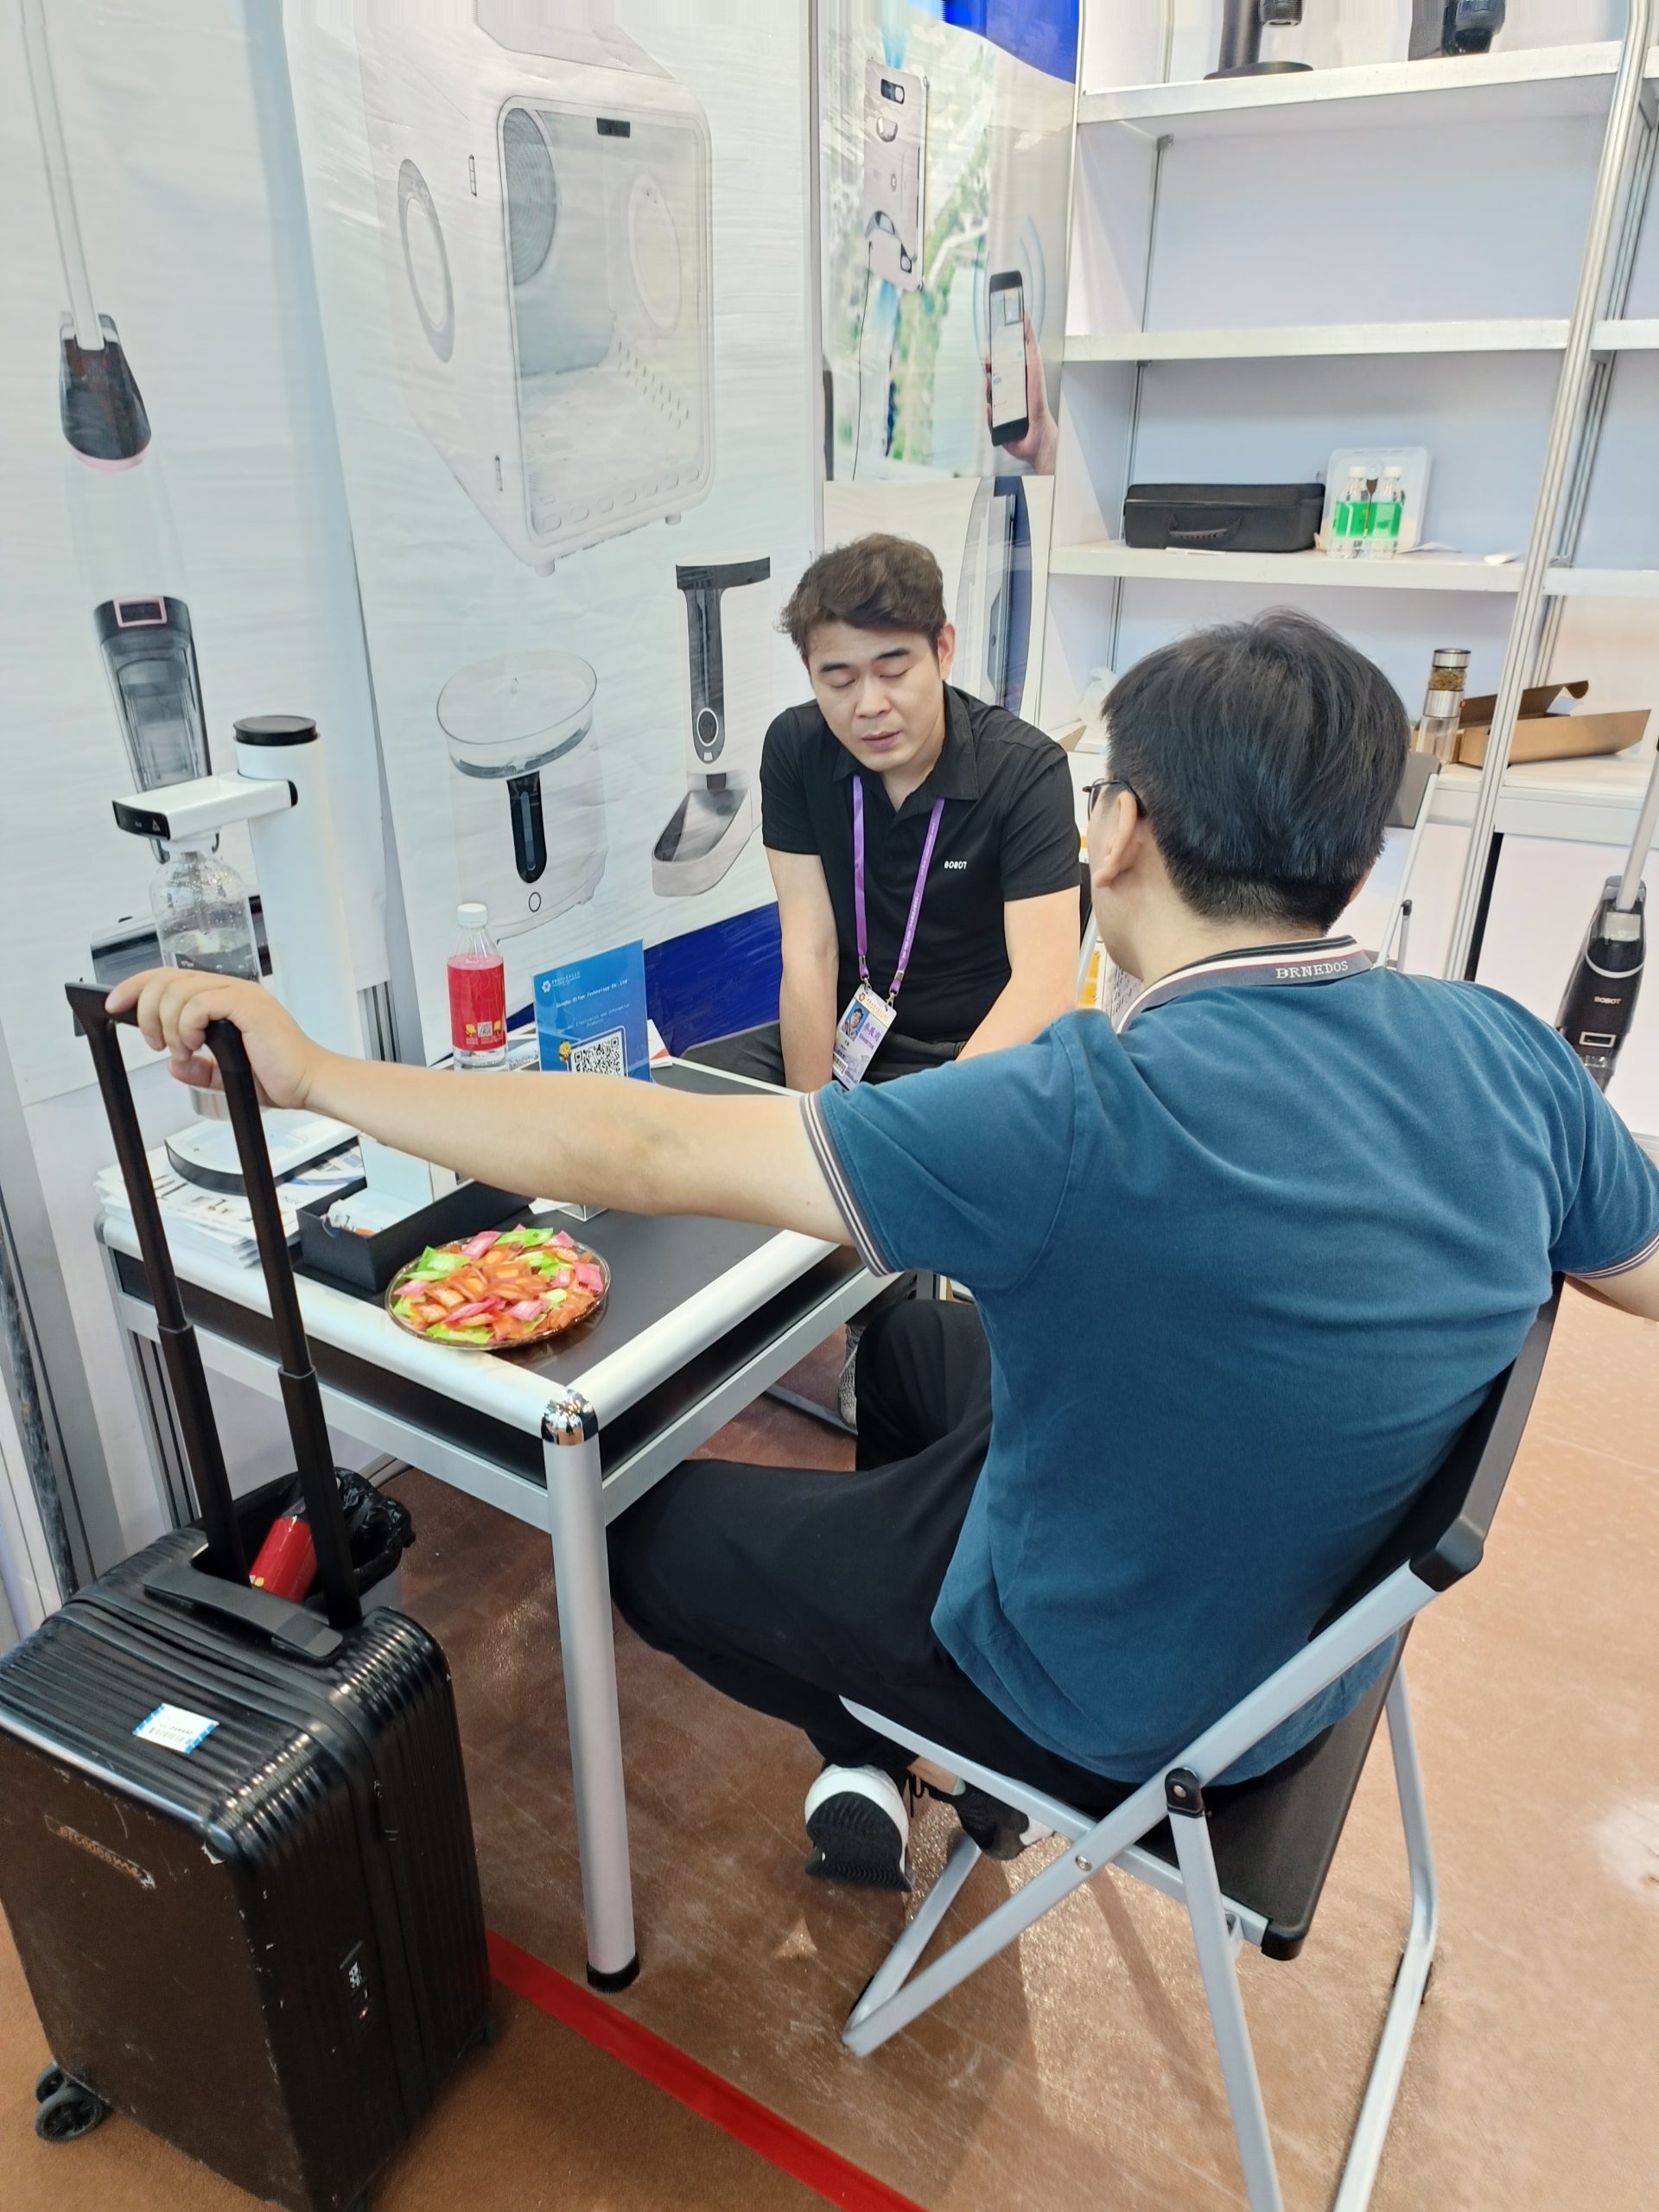 Bengbu MiFan Technology Co., Ltd to Showcase Innovative Wet-Dry Vacuum Cleaners, and Window Robot Cleaners at the 133rd Canton Fair in Guangzhou, China. - Company News - 5